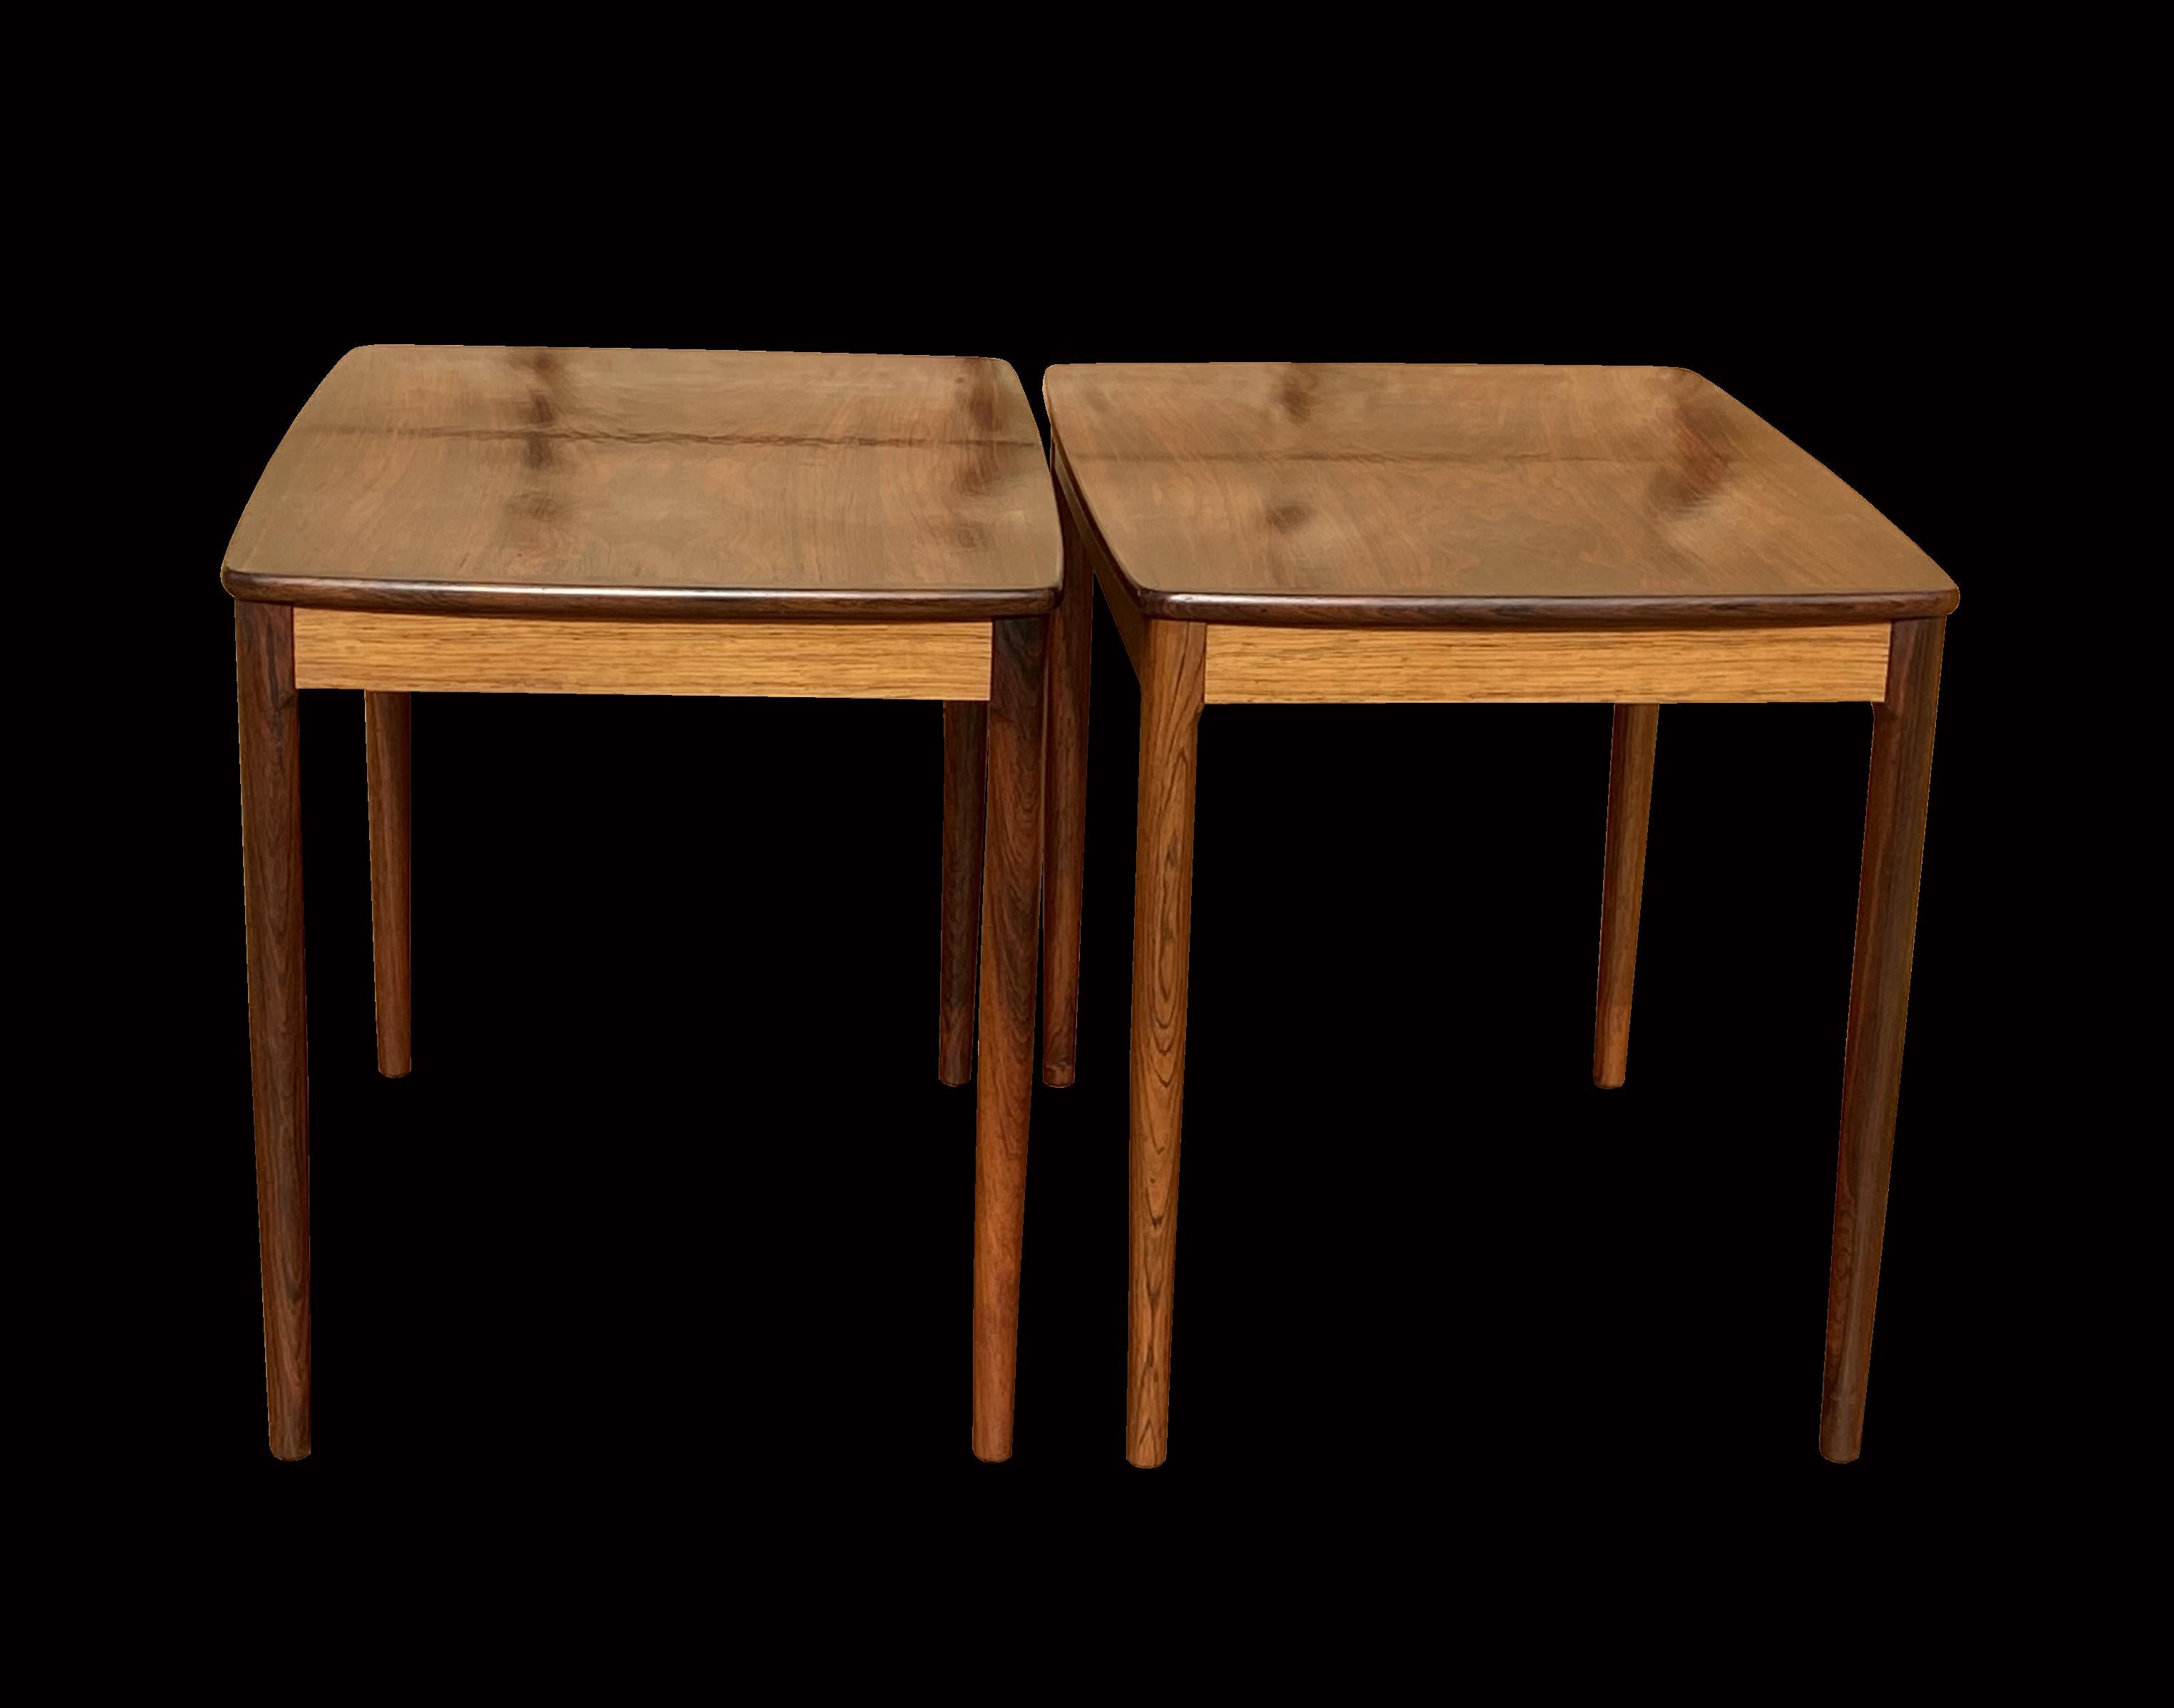 This beautiful original pair of tables, could be used as side, end or bedsides. The perfectly matched veneers just emphasise the quality of manufacture and the exacting design of Alf Svensson and Yngve Sandstrom for Seffle Mobelfabrik.